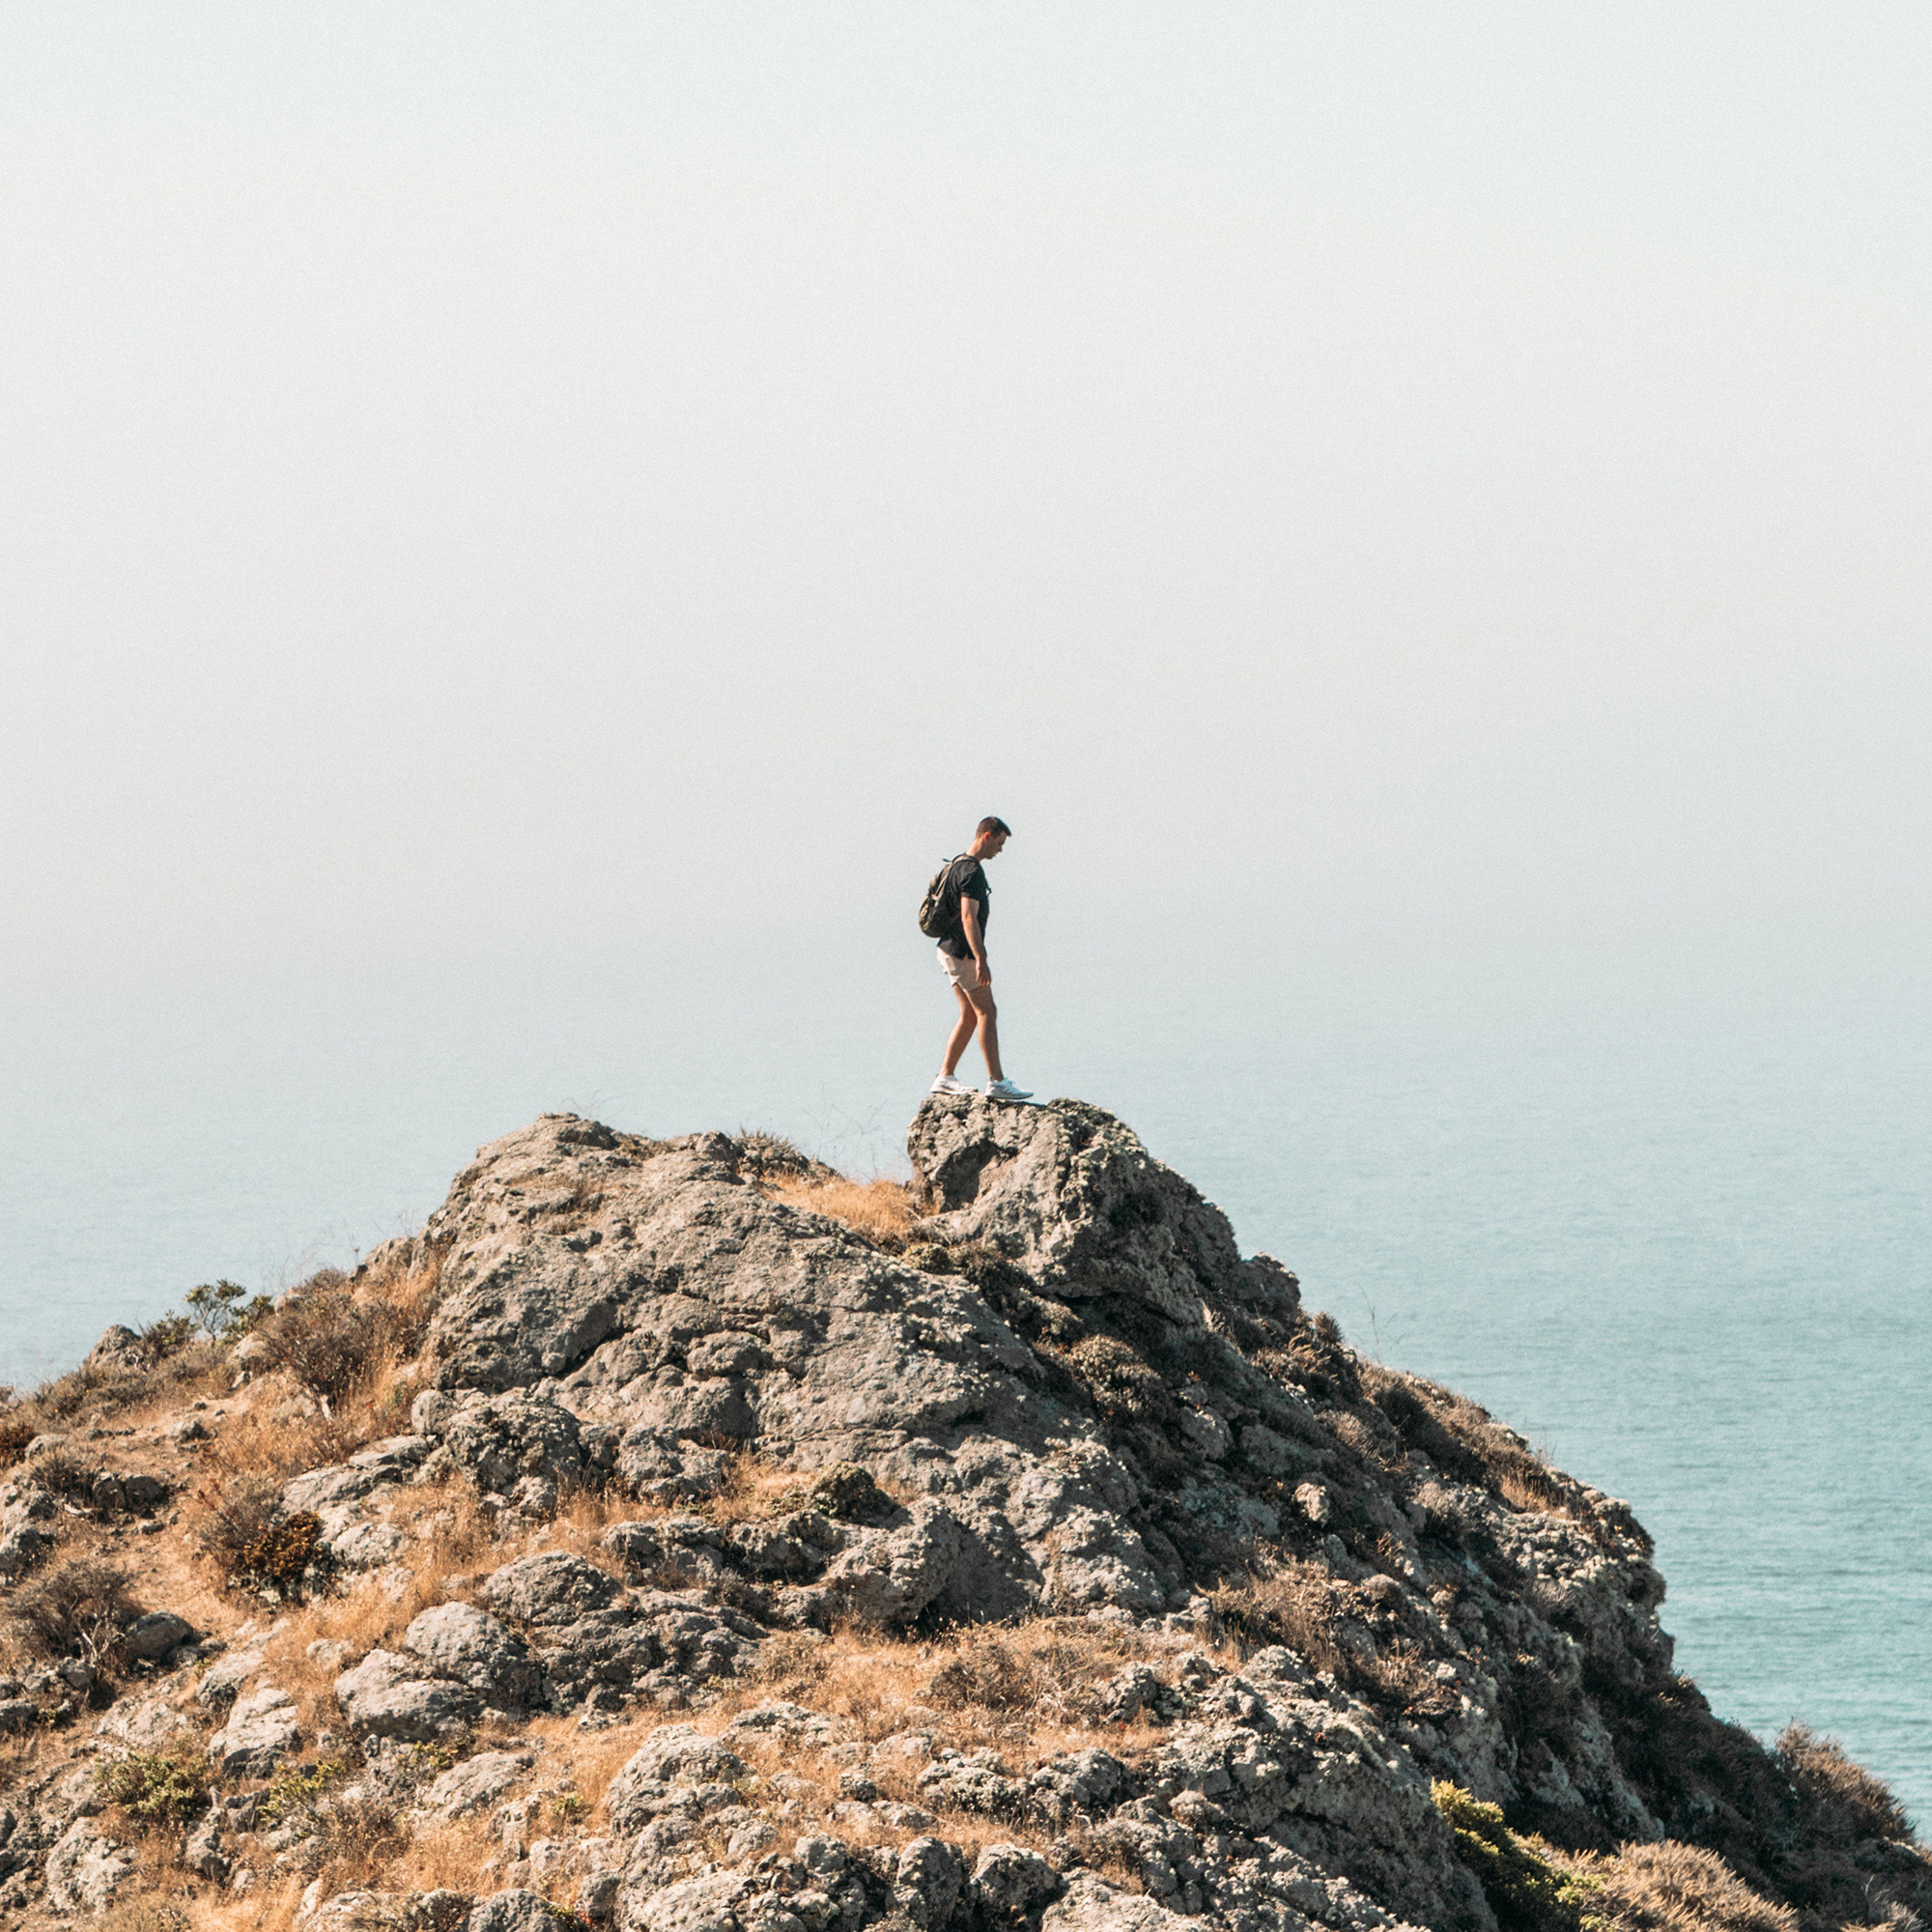 A man standing on a cliff